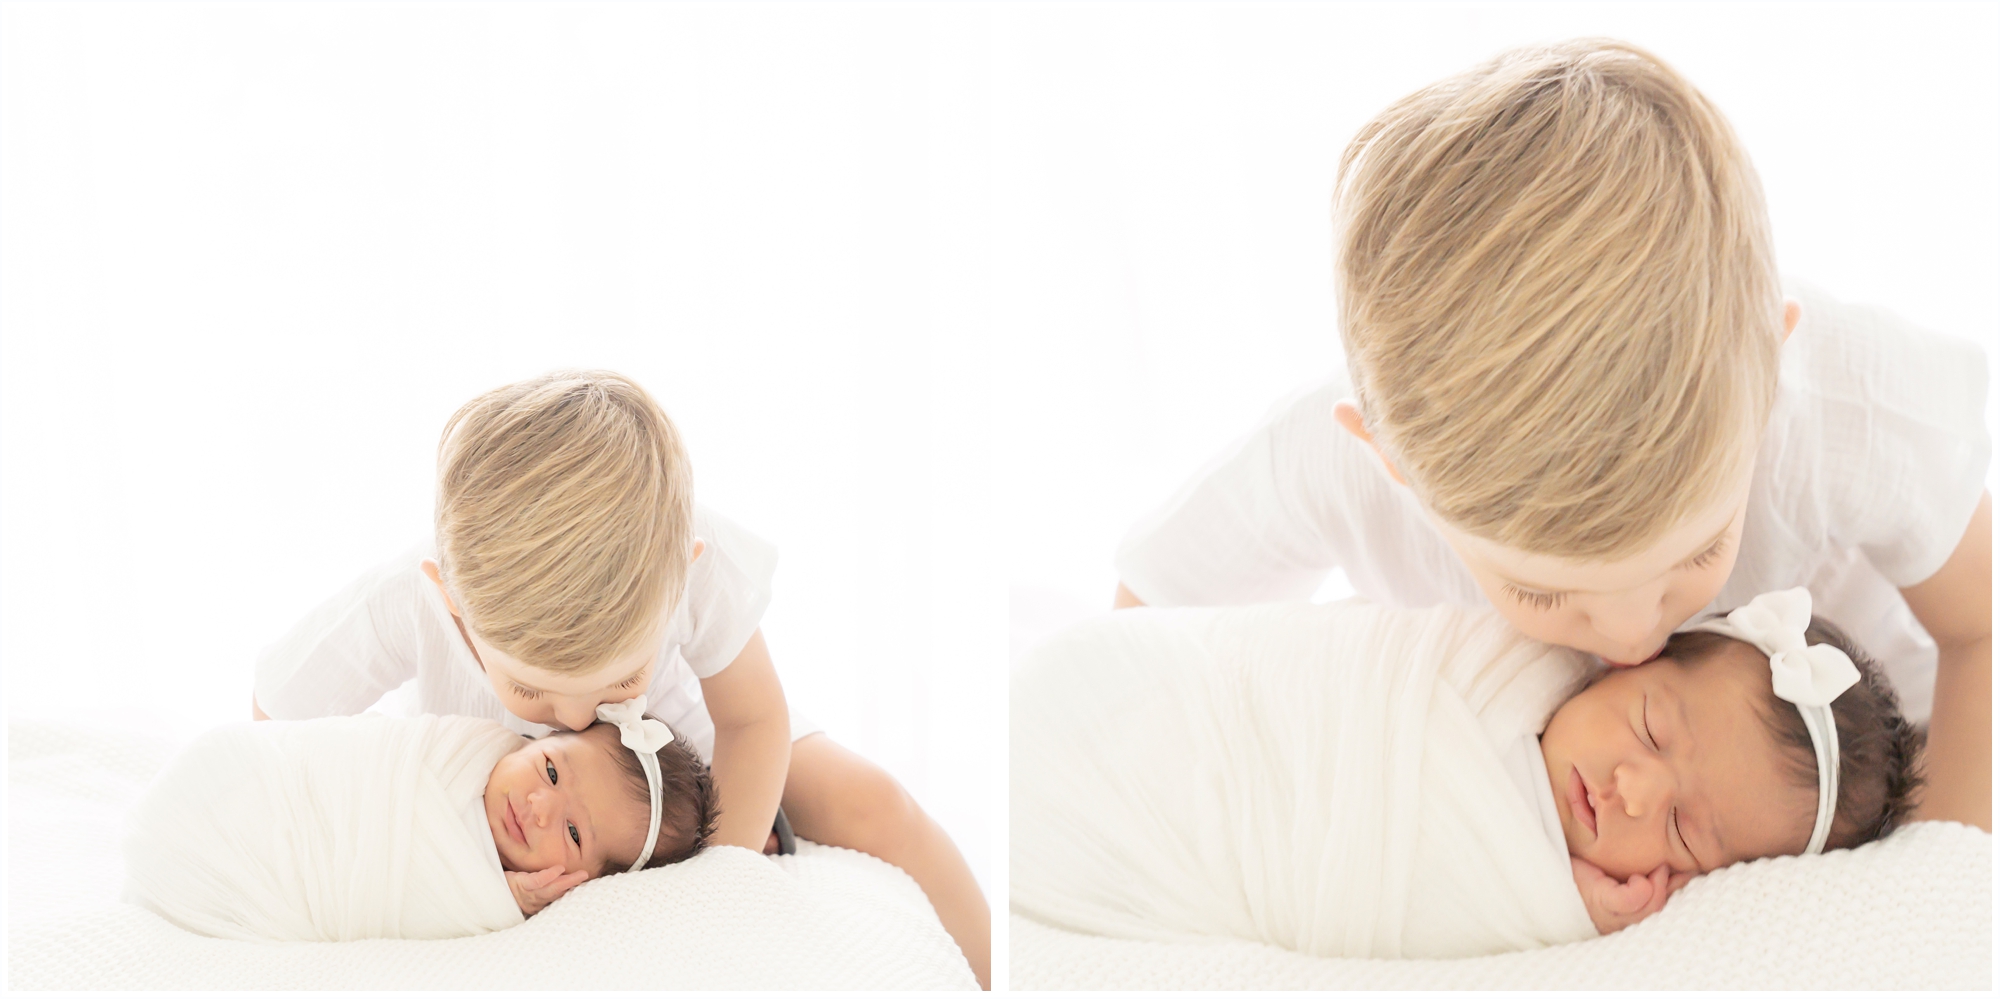 Brother and new baby at their Newborn Photoshoot in Jupiter Fl studio